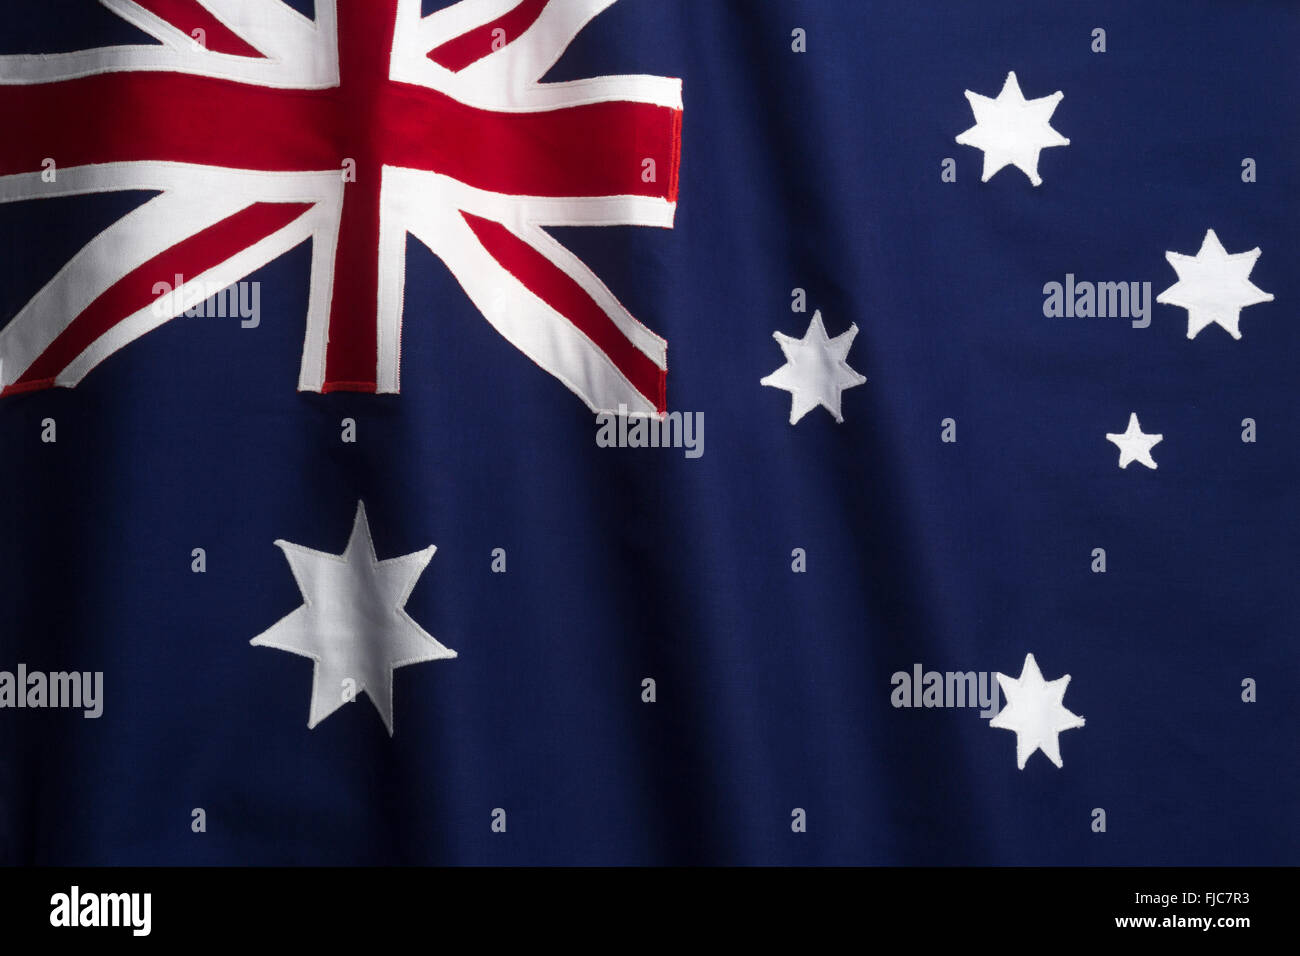 orkester Person med ansvar for sportsspil Eksperiment AUSTRALIAN FLAG MADE OF STITCHED COTTON BUNTING Stock Photo - Alamy